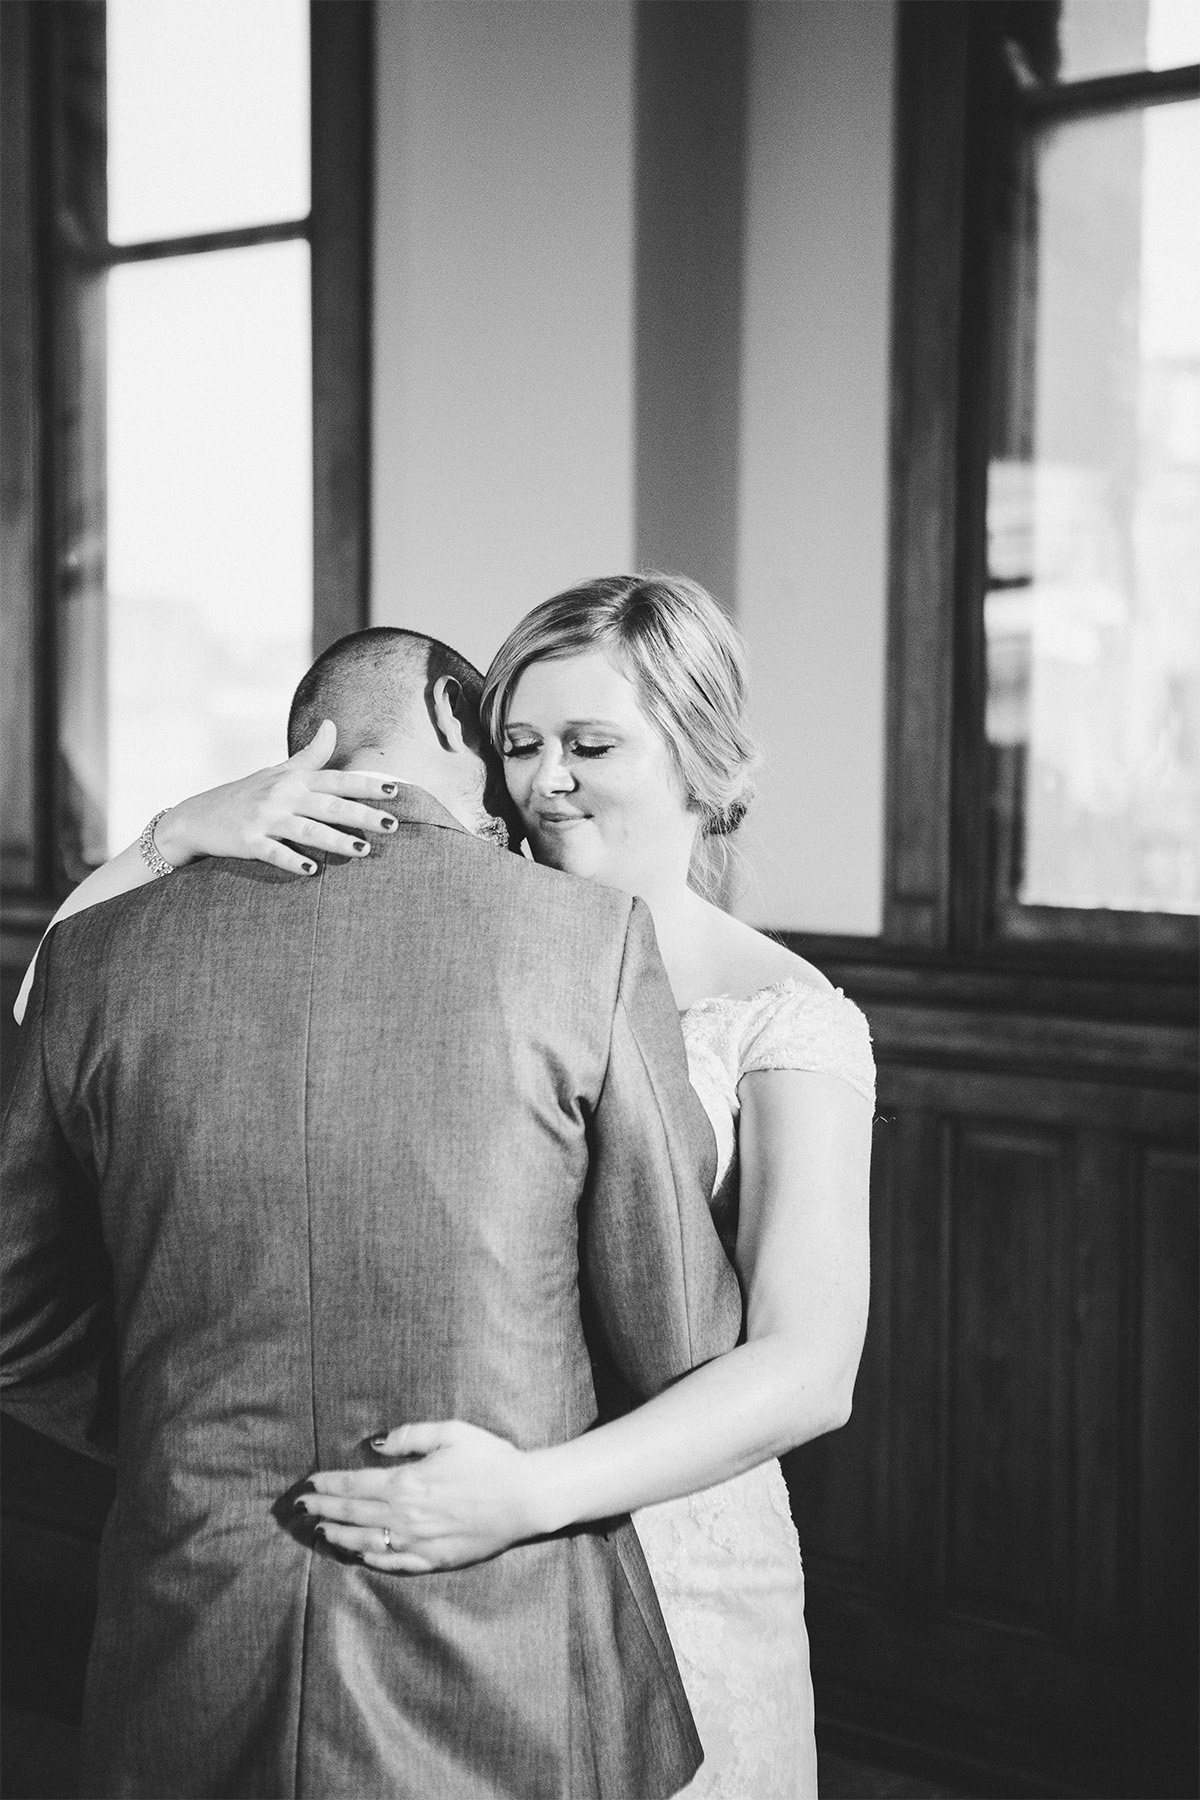 Intimate Knoxville, Tennessee Wedding - Izzy Hudgins Photography - Knoxville Wedding Photographer - The Historic Southern Railway Station